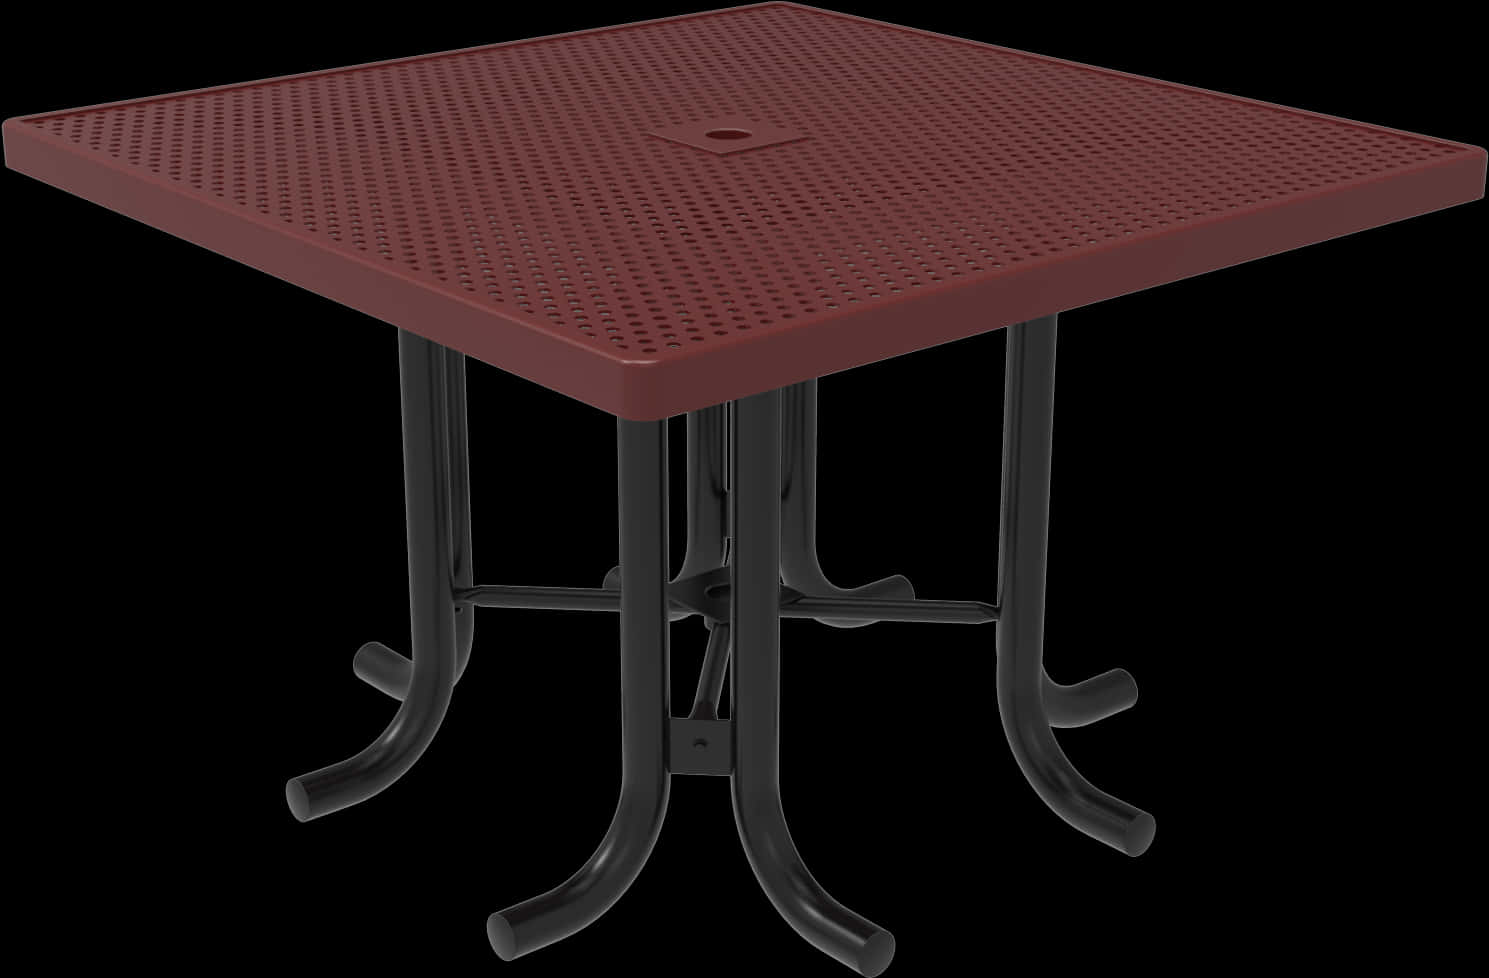 A Square Table With A Black Base